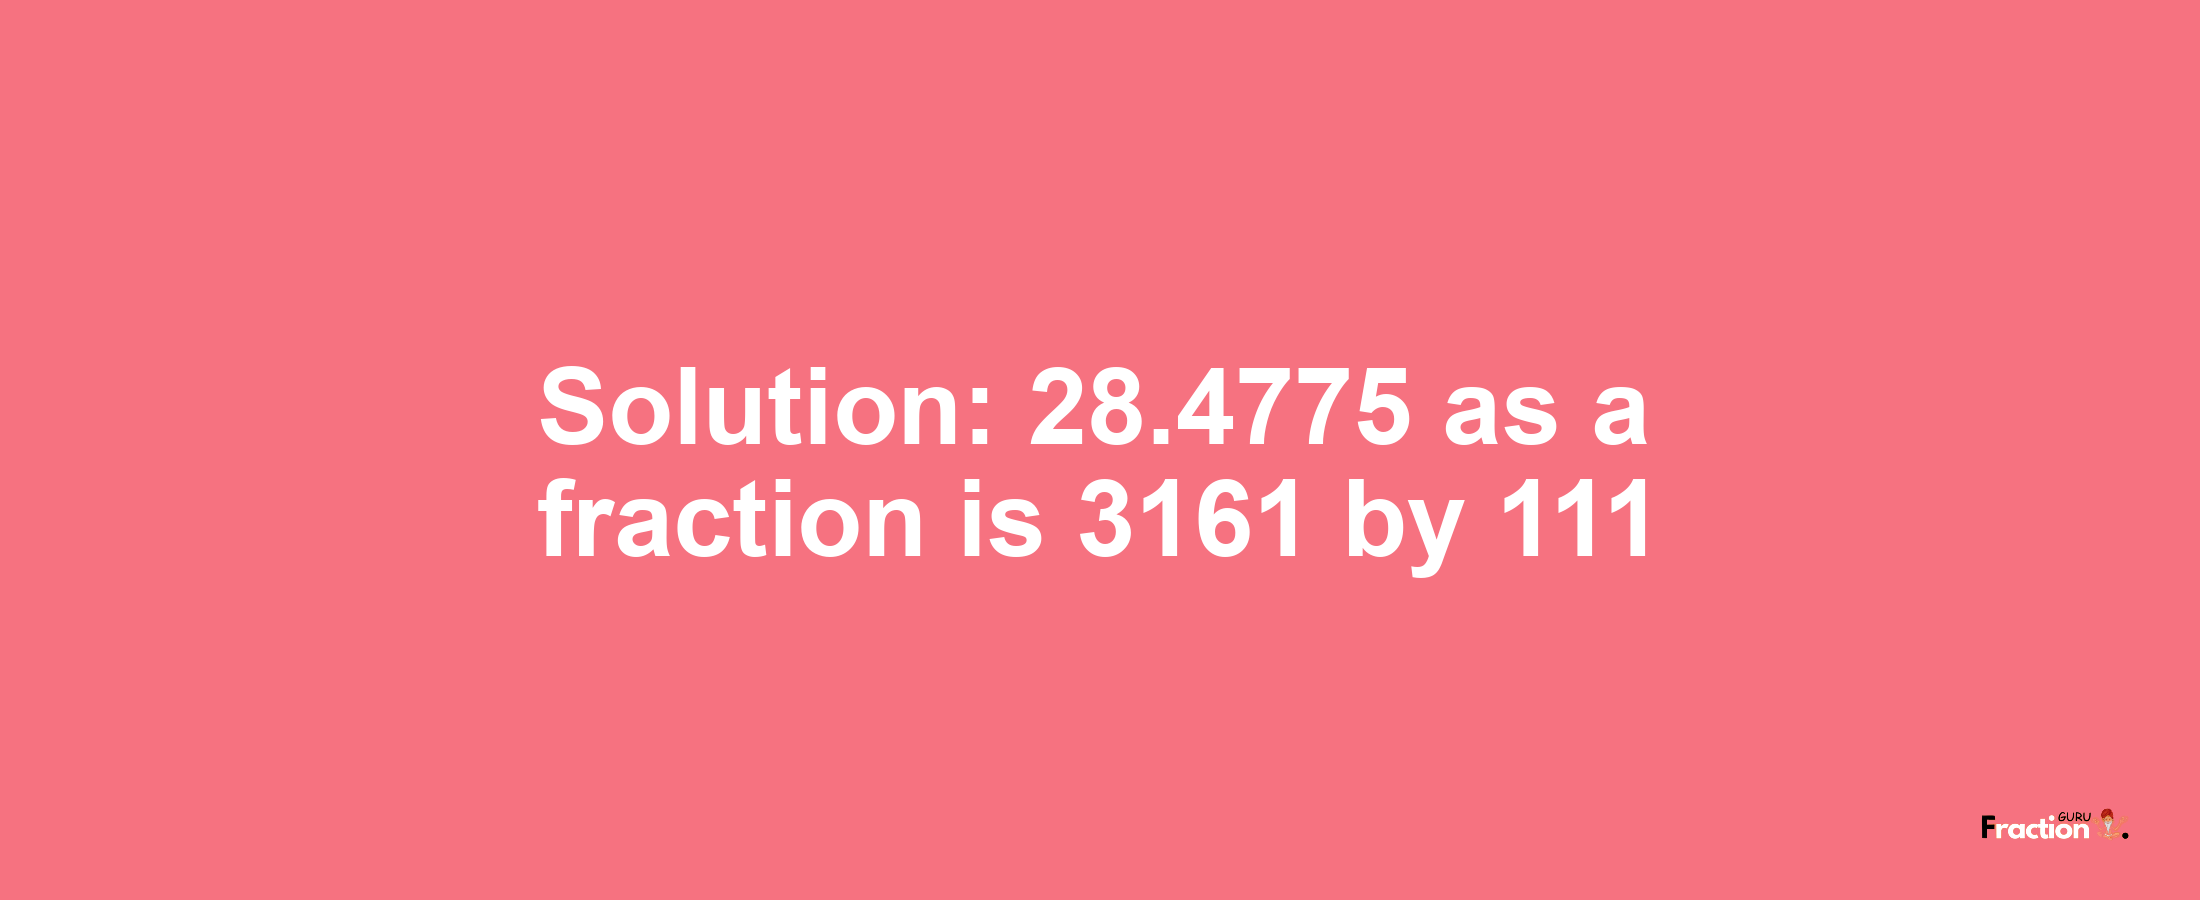 Solution:28.4775 as a fraction is 3161/111